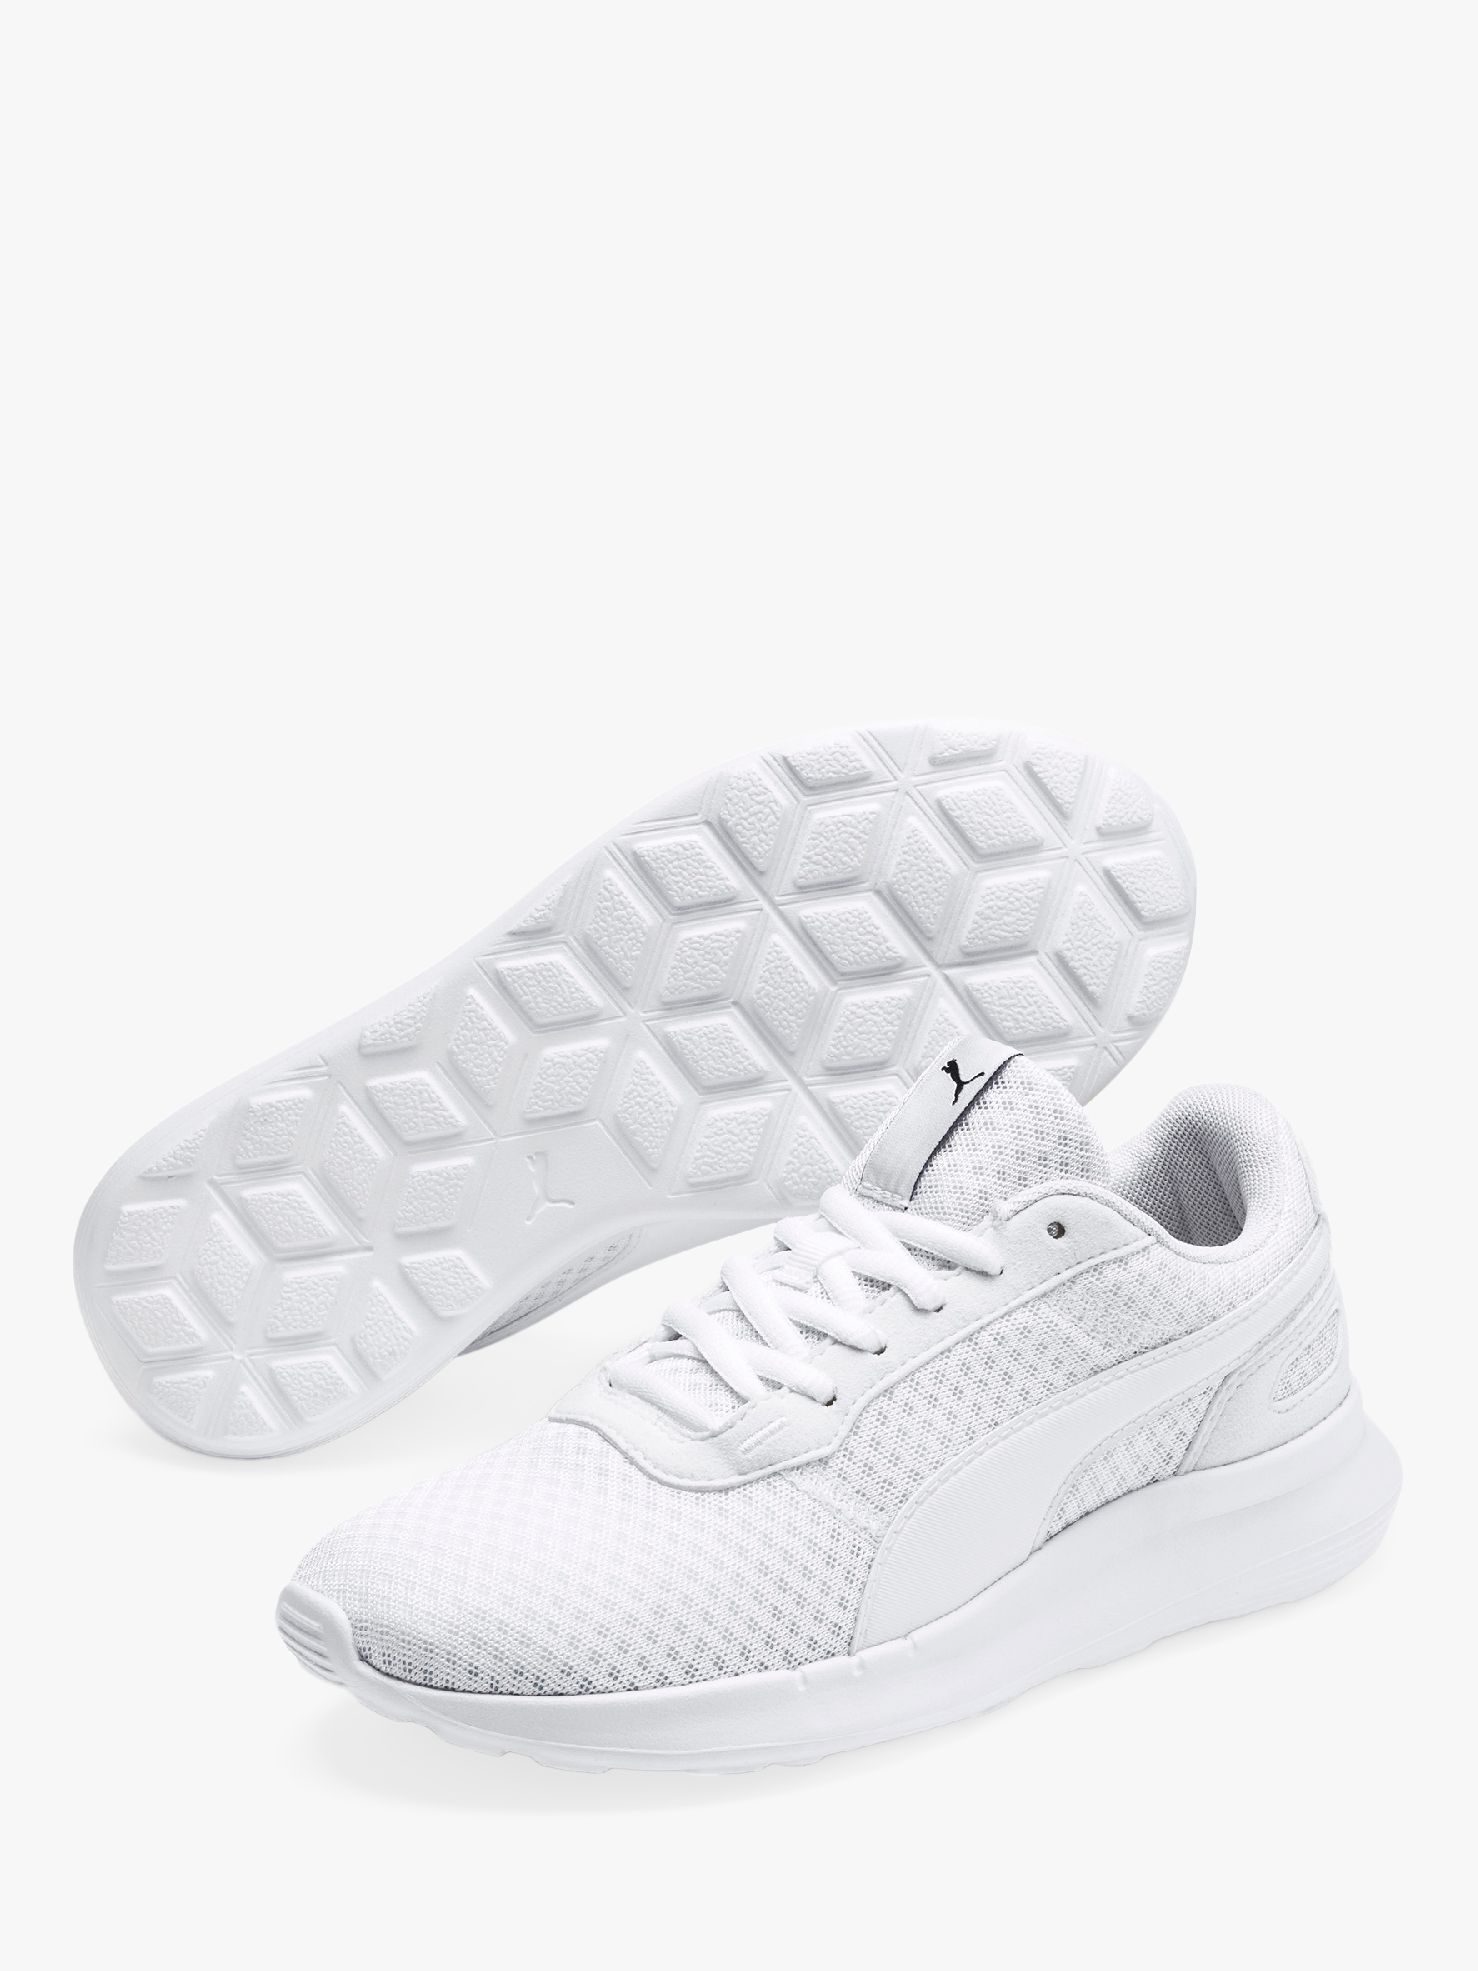 PUMA Children's St Activate Trainers, White at John Lewis \u0026 Partners